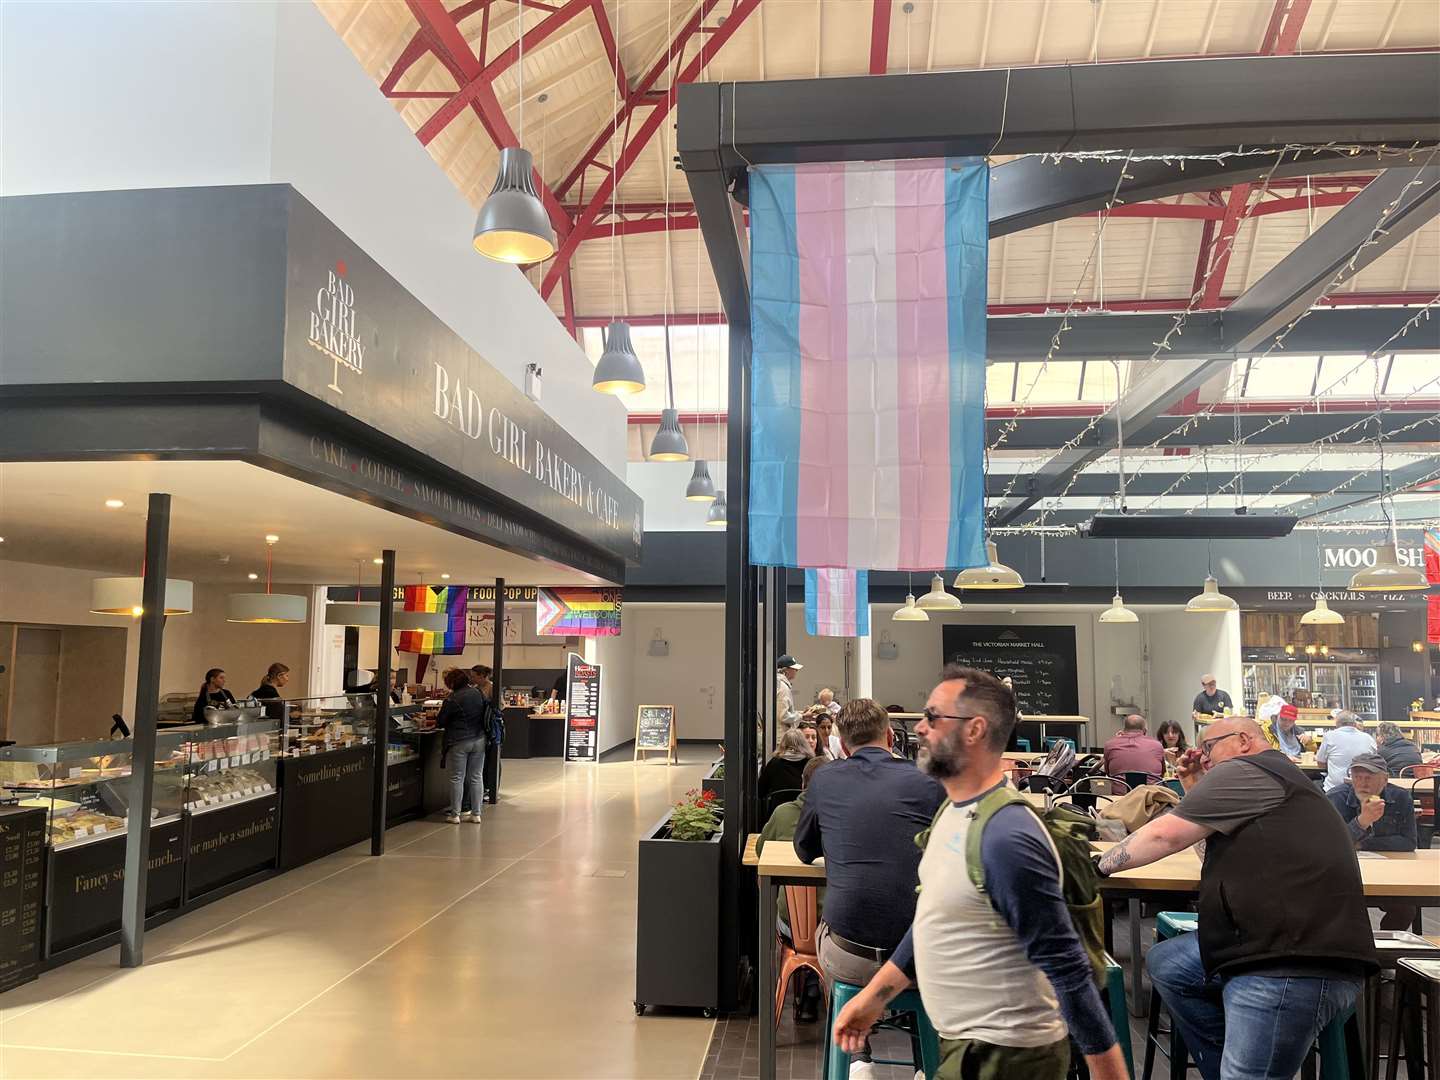 The trans flag is on full display at the Victorian Market too. Picture: Stephen Doyle